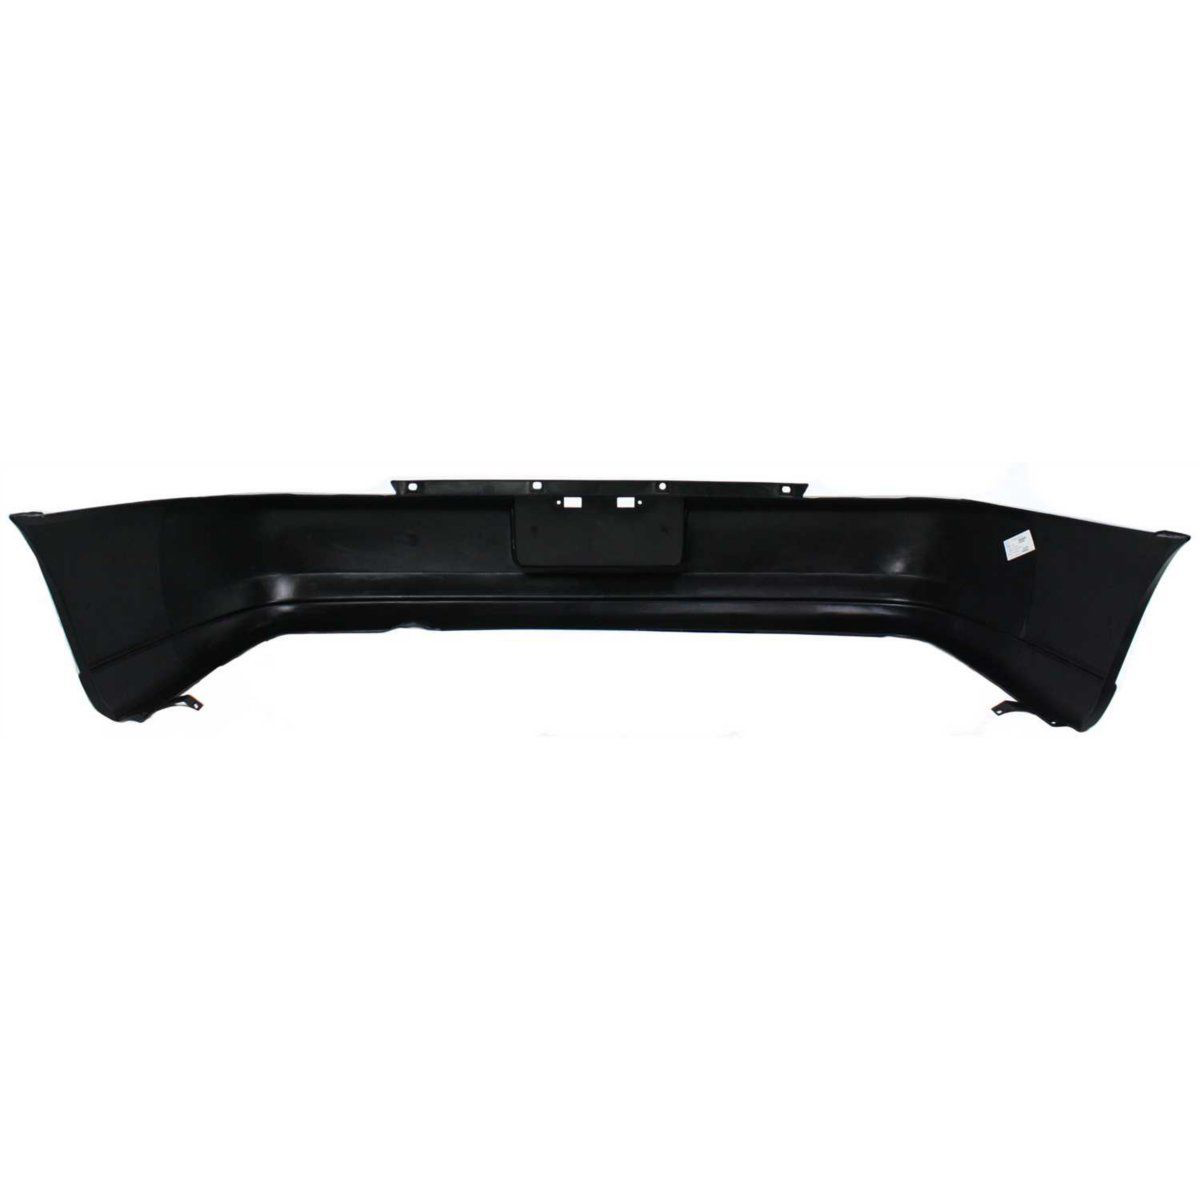 1998-1999 NISSAN ALTIMA Rear Bumper Cover Painted to Match